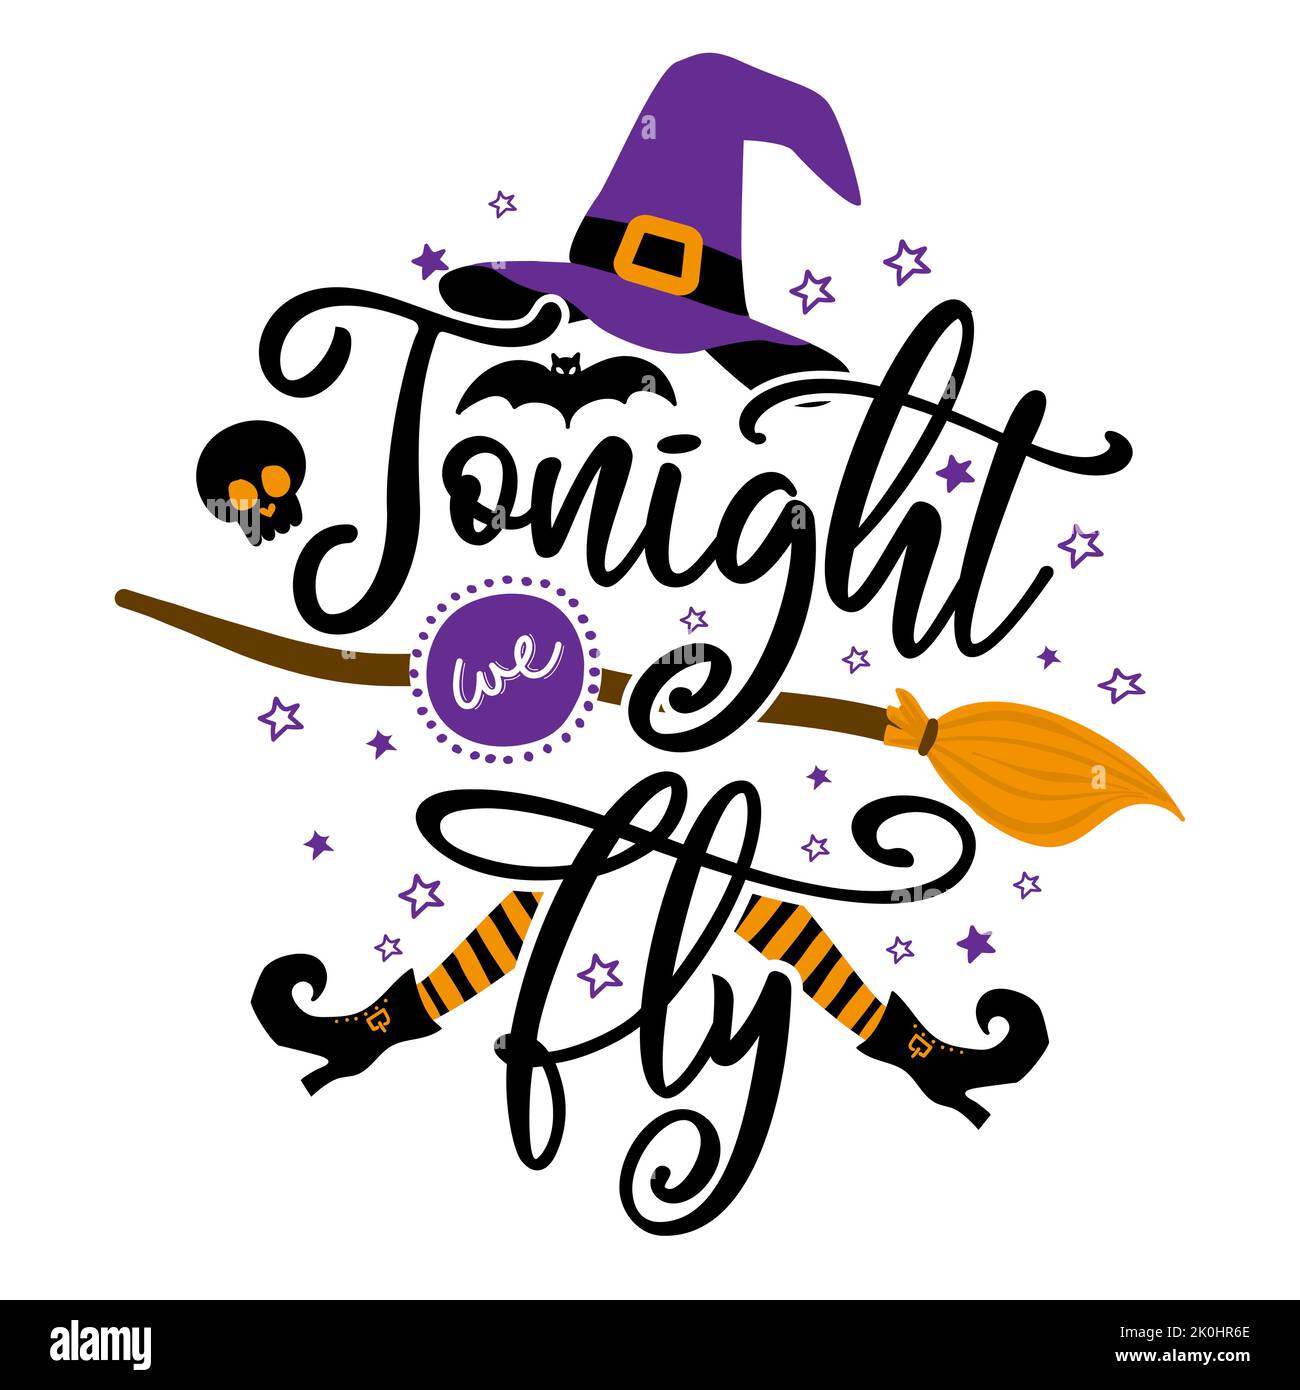 Tonight we fly - Halloween Witch quote on white background with broom, bats and witch hat. Good for t-shirt, mug, scrap booking, gift, printing press. Stock Vector